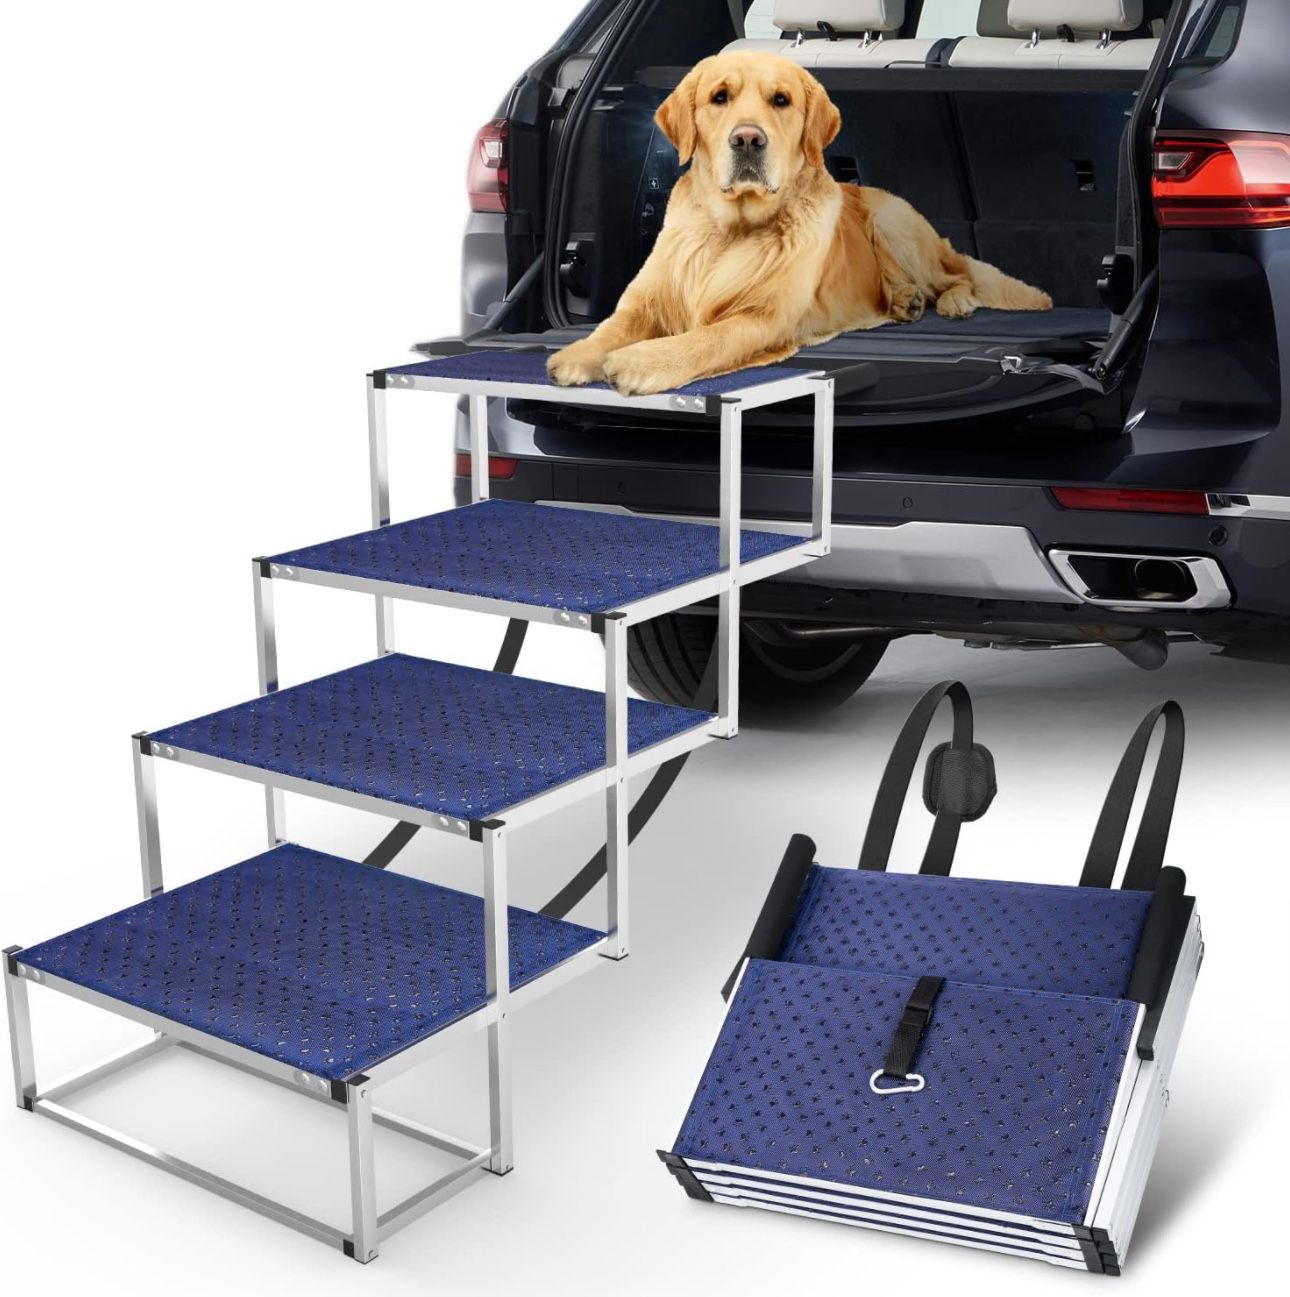 Extra Wide Dog Car Stairs for Large Dogs, Foldable Aluminum Lightweight Dog Step